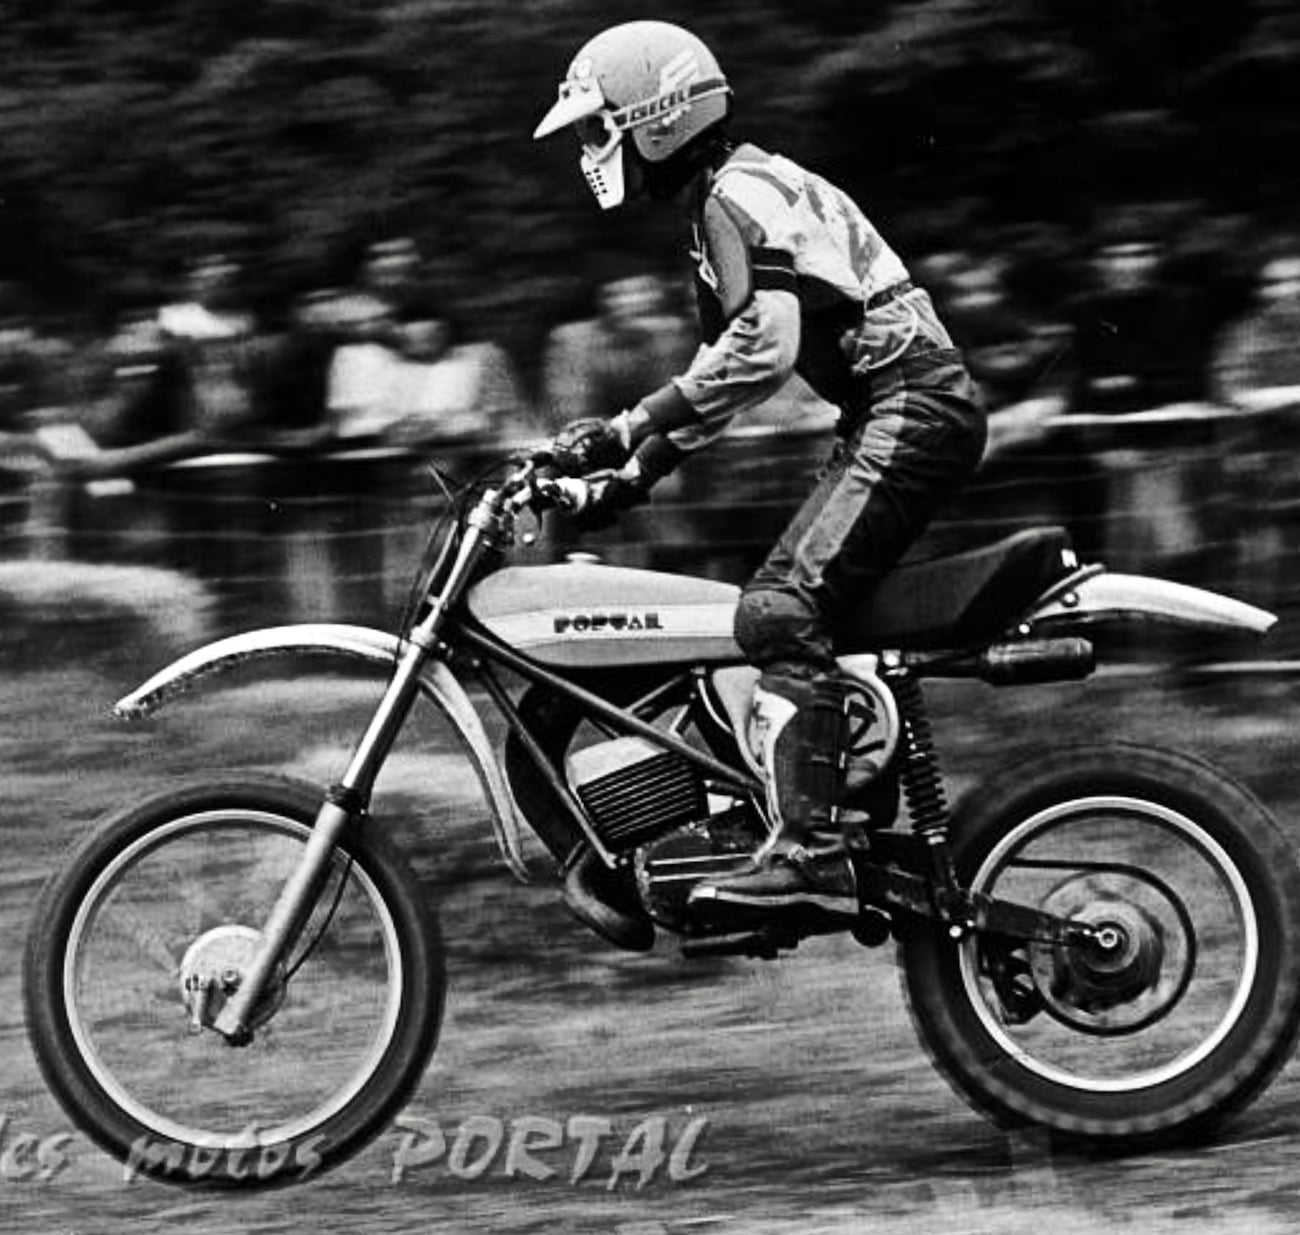 Denis Portal was the 1966 250 French National Motocross Champion. He started at BPS, but had a disagreement over private-labeling SWMs and BPS's. So,he started Portal Motorcycles.